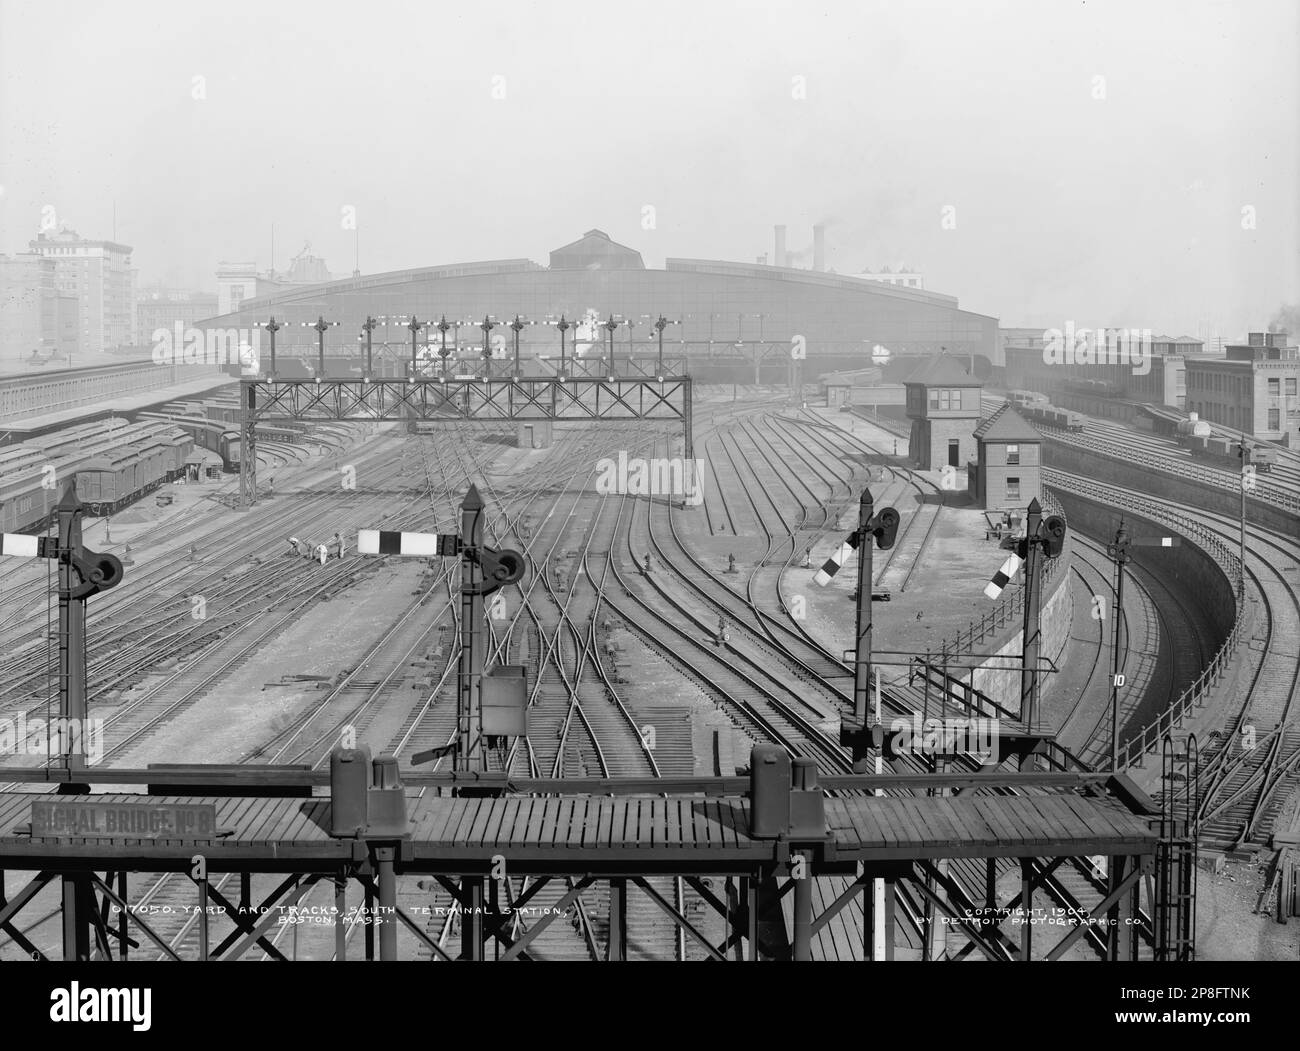 'English:  Approach tracks and trainshed of South Station in Boston, Massachusetts in 1904. The tracks leading to the unused underground platform are at right.; circa 1904 date QS:P,+1904-00-00T00:00:00Z/9,P1480,Q5727902; This file was derived from: Yard and tracks, South Terminal Station, Boston, Mass.jpg:         This image  is available from the United States Library of Congress's Prints and Photographs division under the digital ID det.4a11367.This tag does not indicate the copyright status of the attached work. A normal copyright tag is still required. See Commons:Licensing for more infor Stock Photo